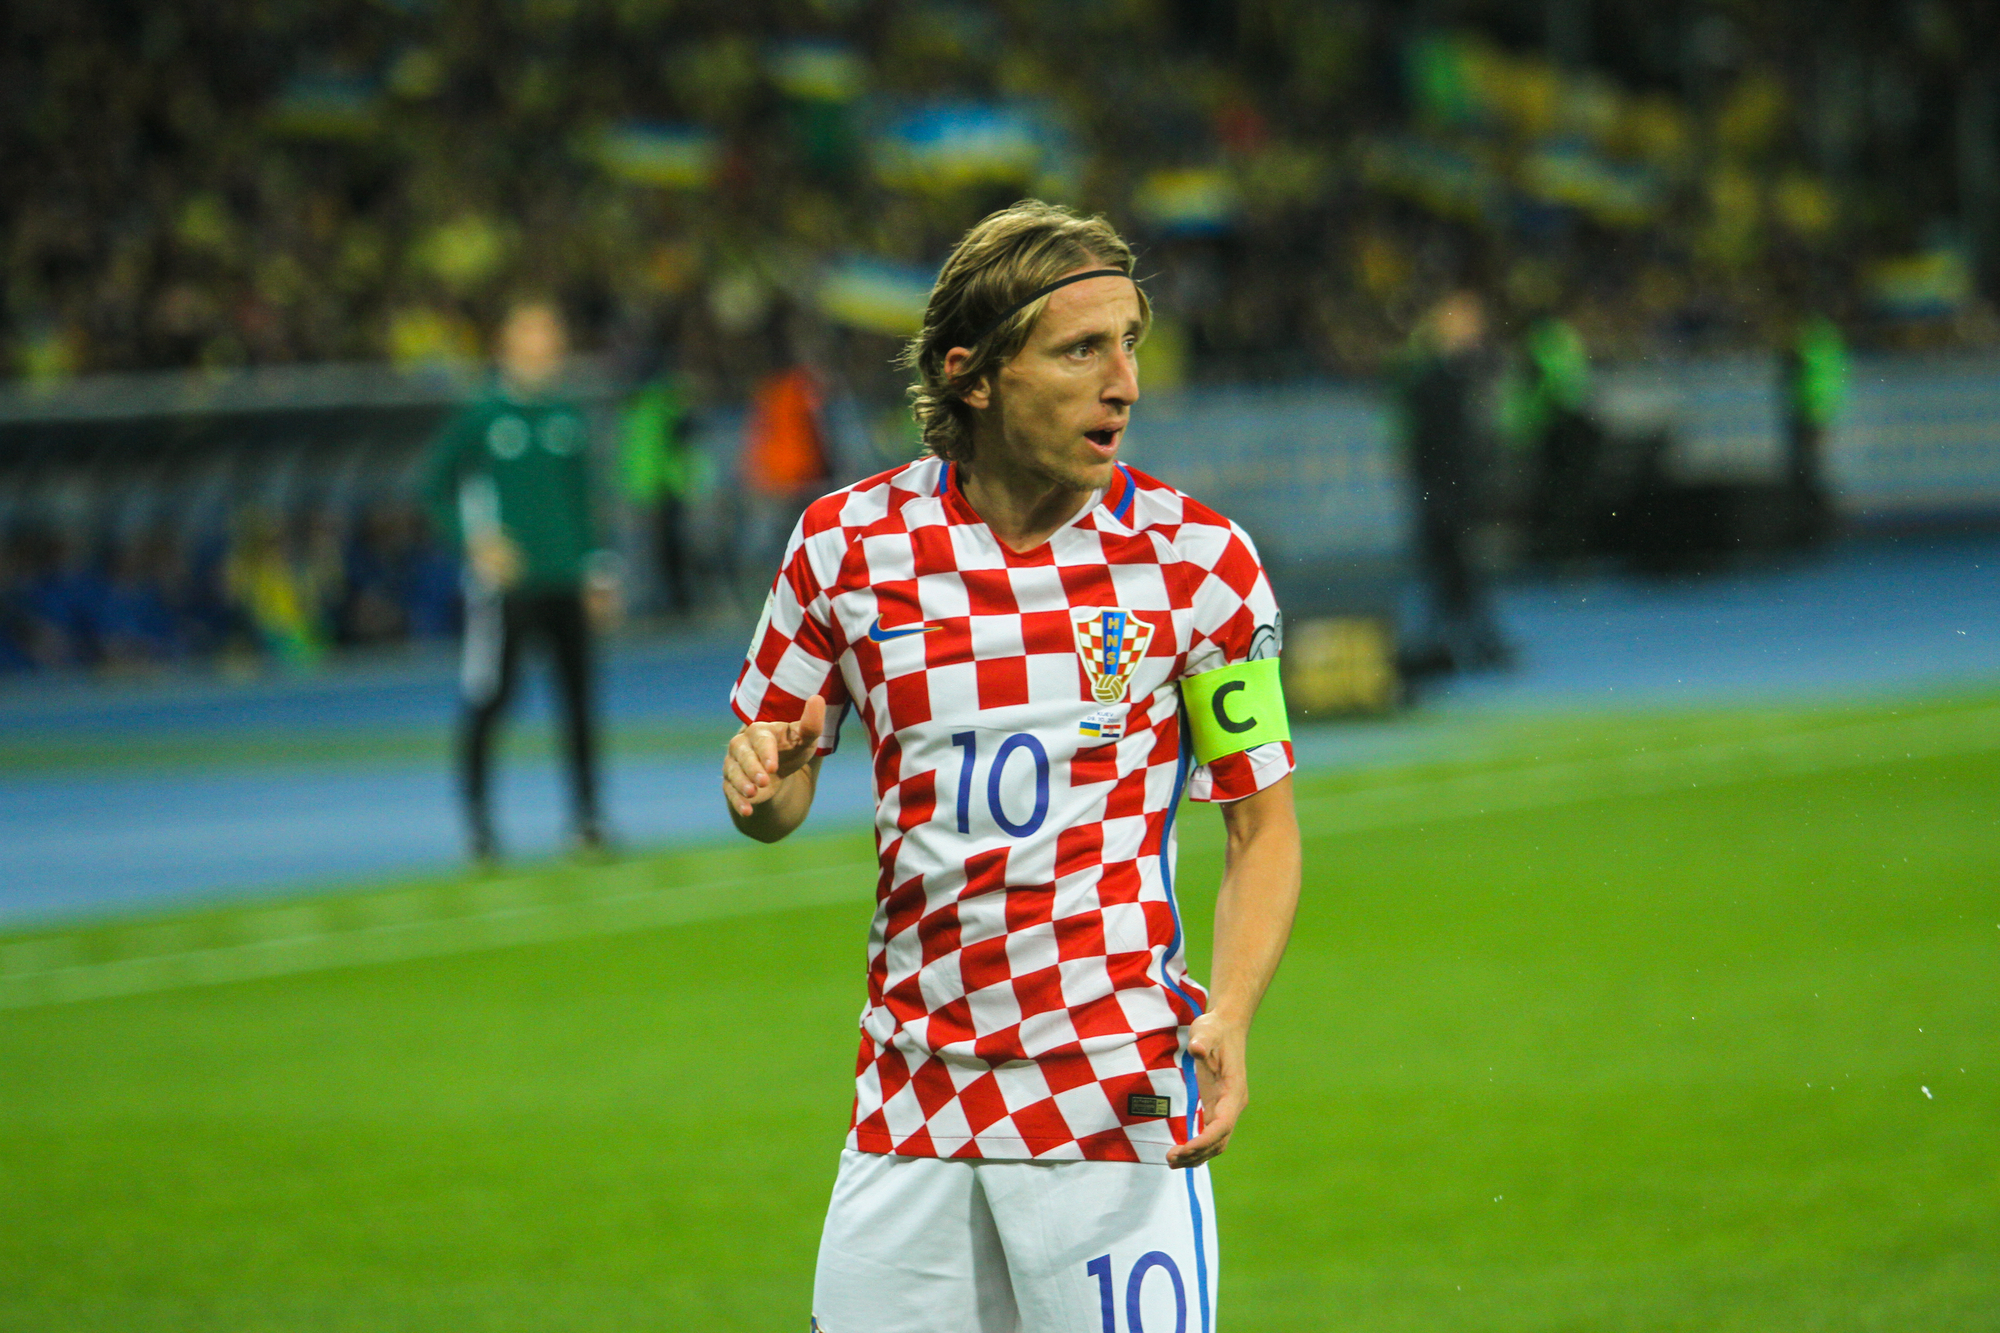 The best players in Croatian history